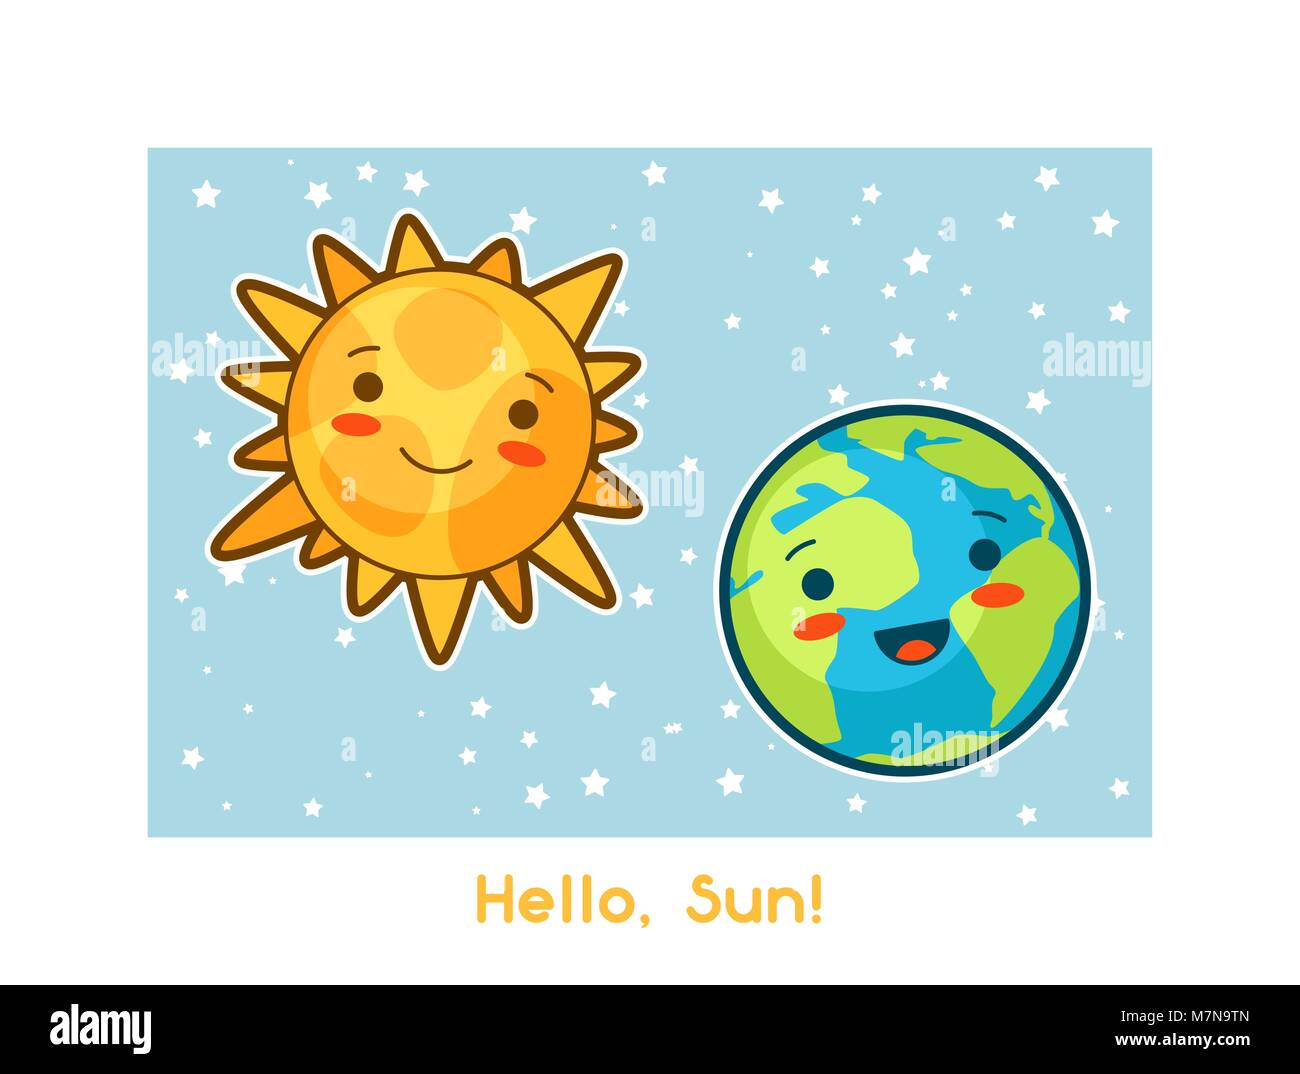 Hello, Sun. Kawaii space funny card. Doodles with pretty facial expression. Illustration of cartoon sun and earth Stock Vector